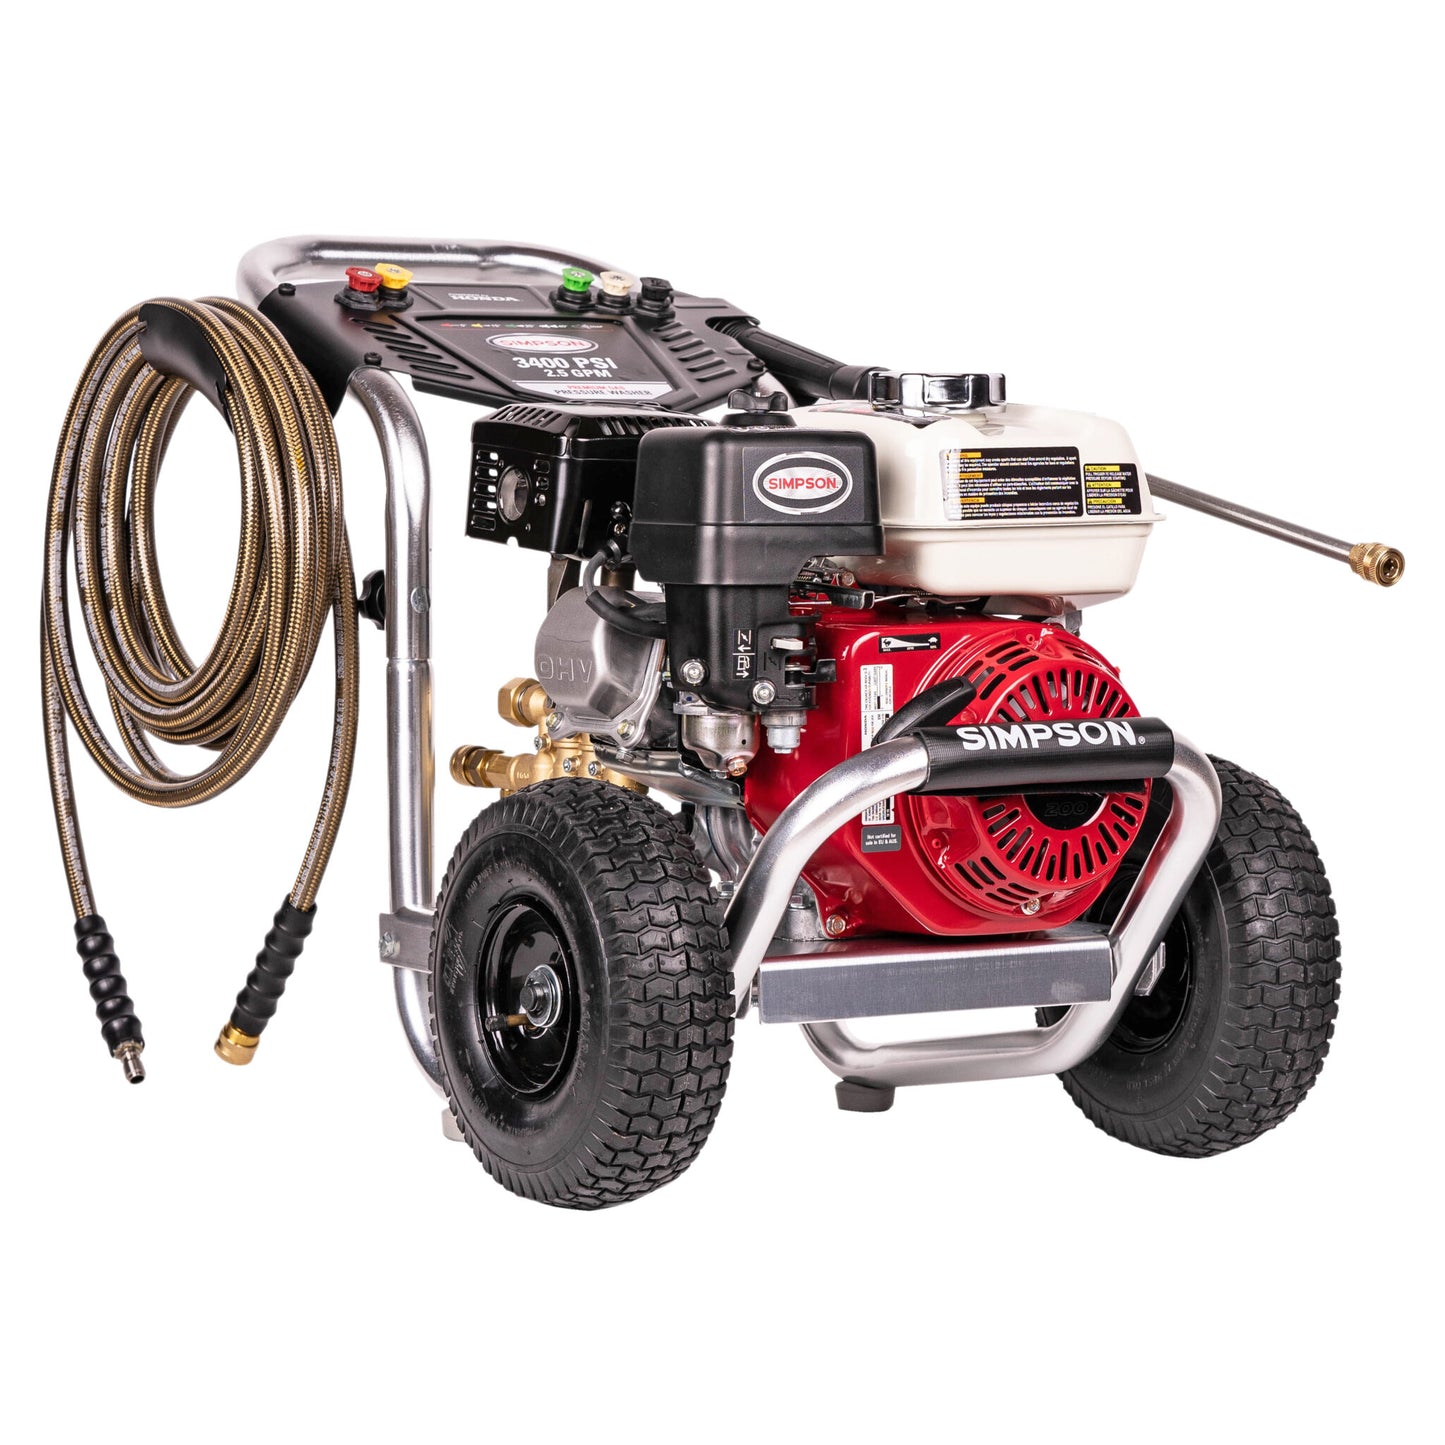 Simpson 3400 PSI at 2.5 GPM Honda GX200 with Triplex Plunger Pump Cold Water Professional Gas Pressure Washer Factory Serviced